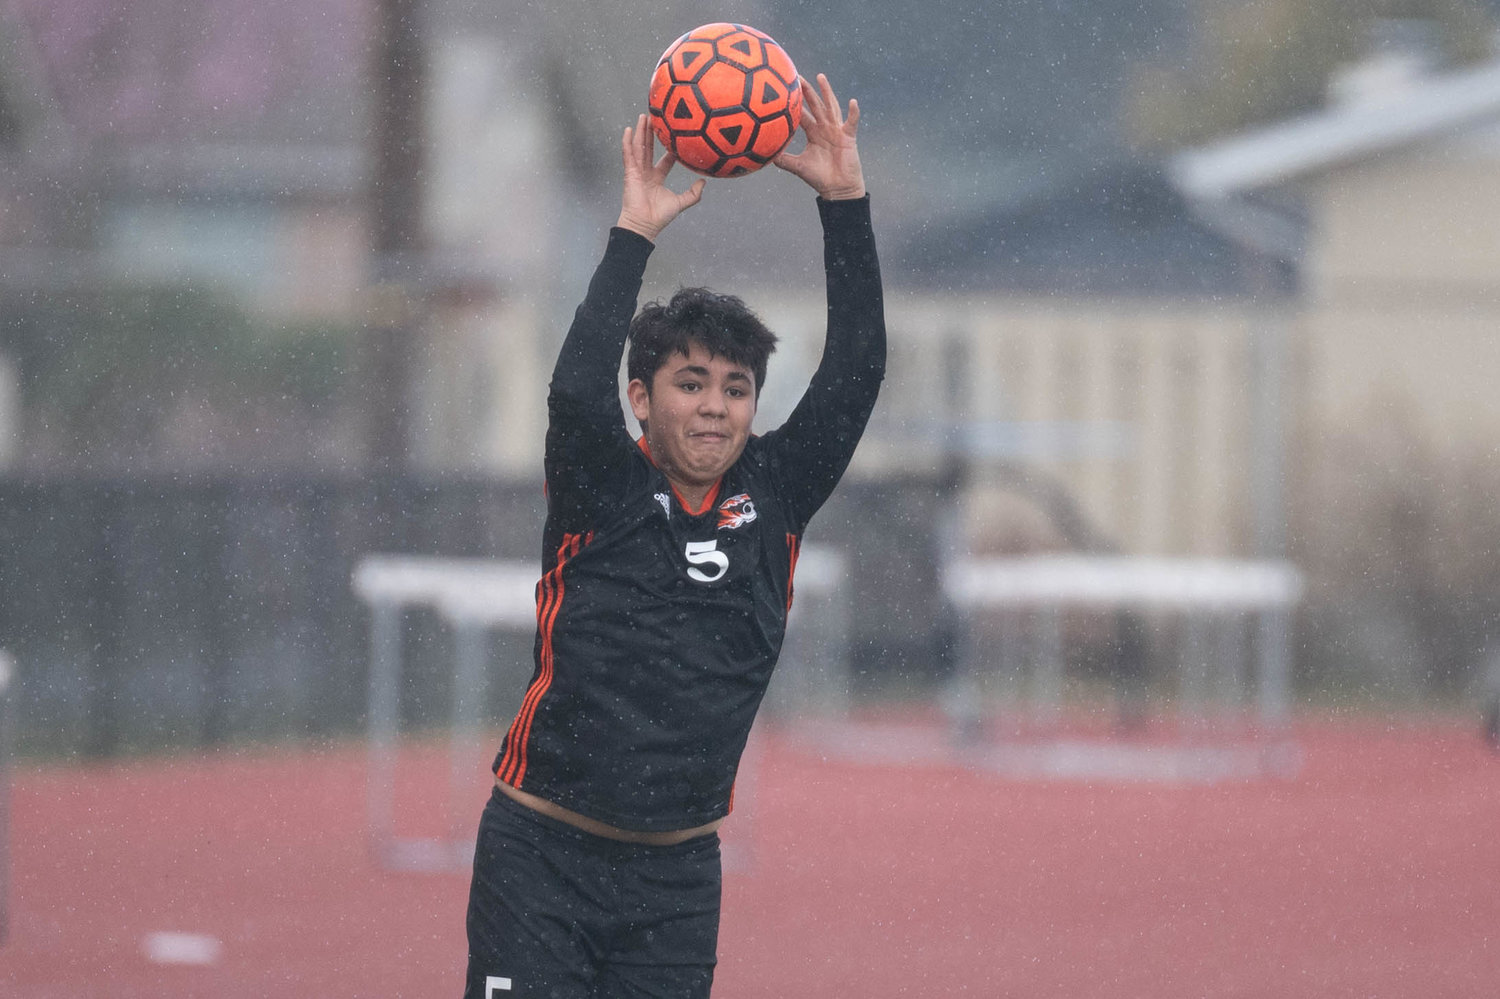 A Centralia player throws the ball in the rain against Tenino March 19 at Tiger Stadium.